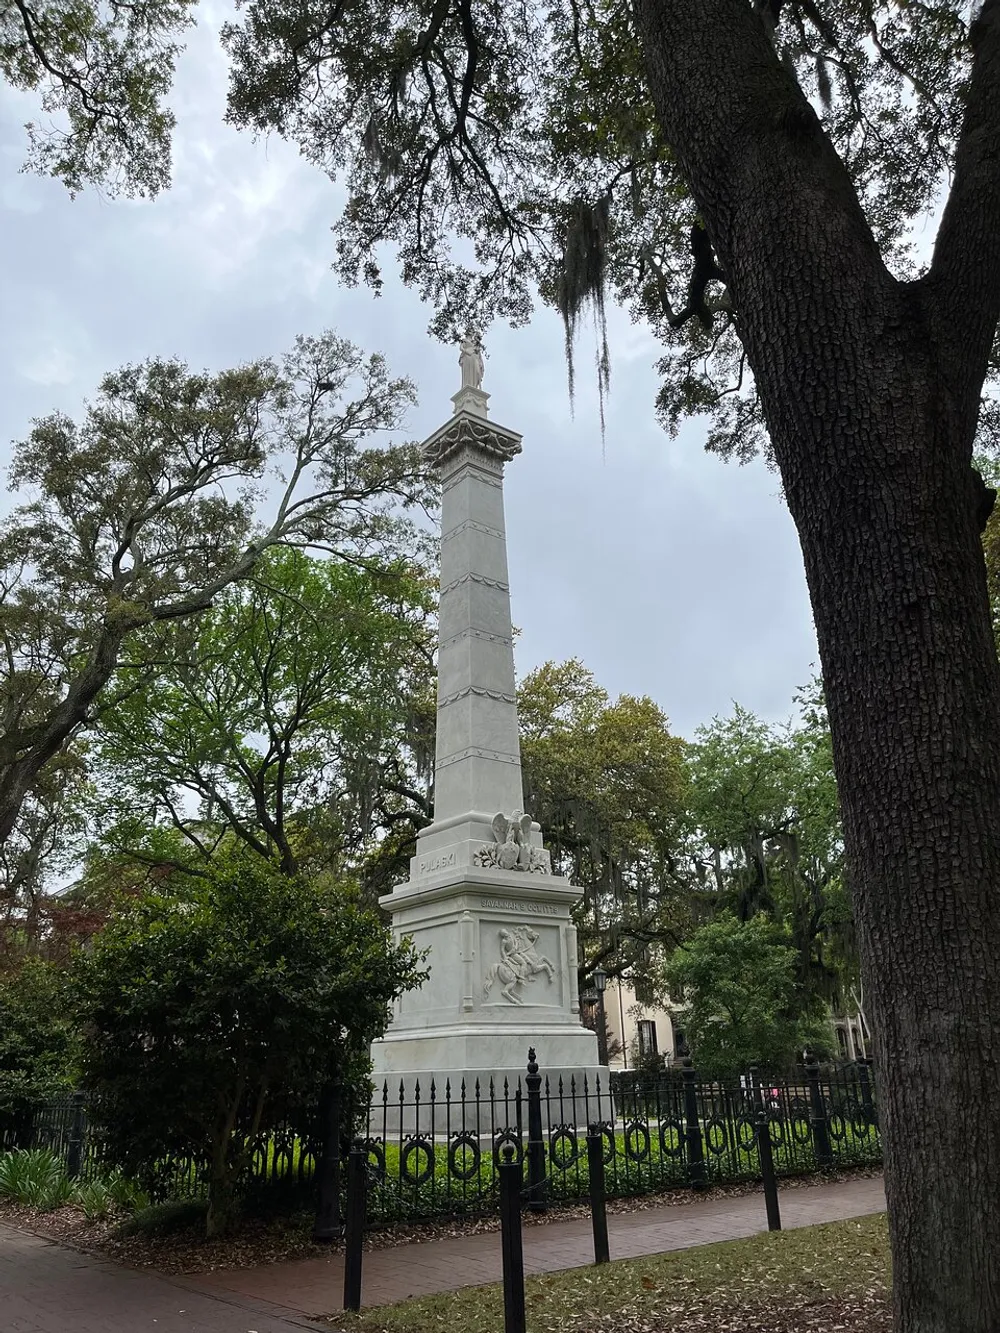 An impressive monument stands tall amidst a serene park setting with lush trees and Spanish moss enclosed by a decorative iron fence